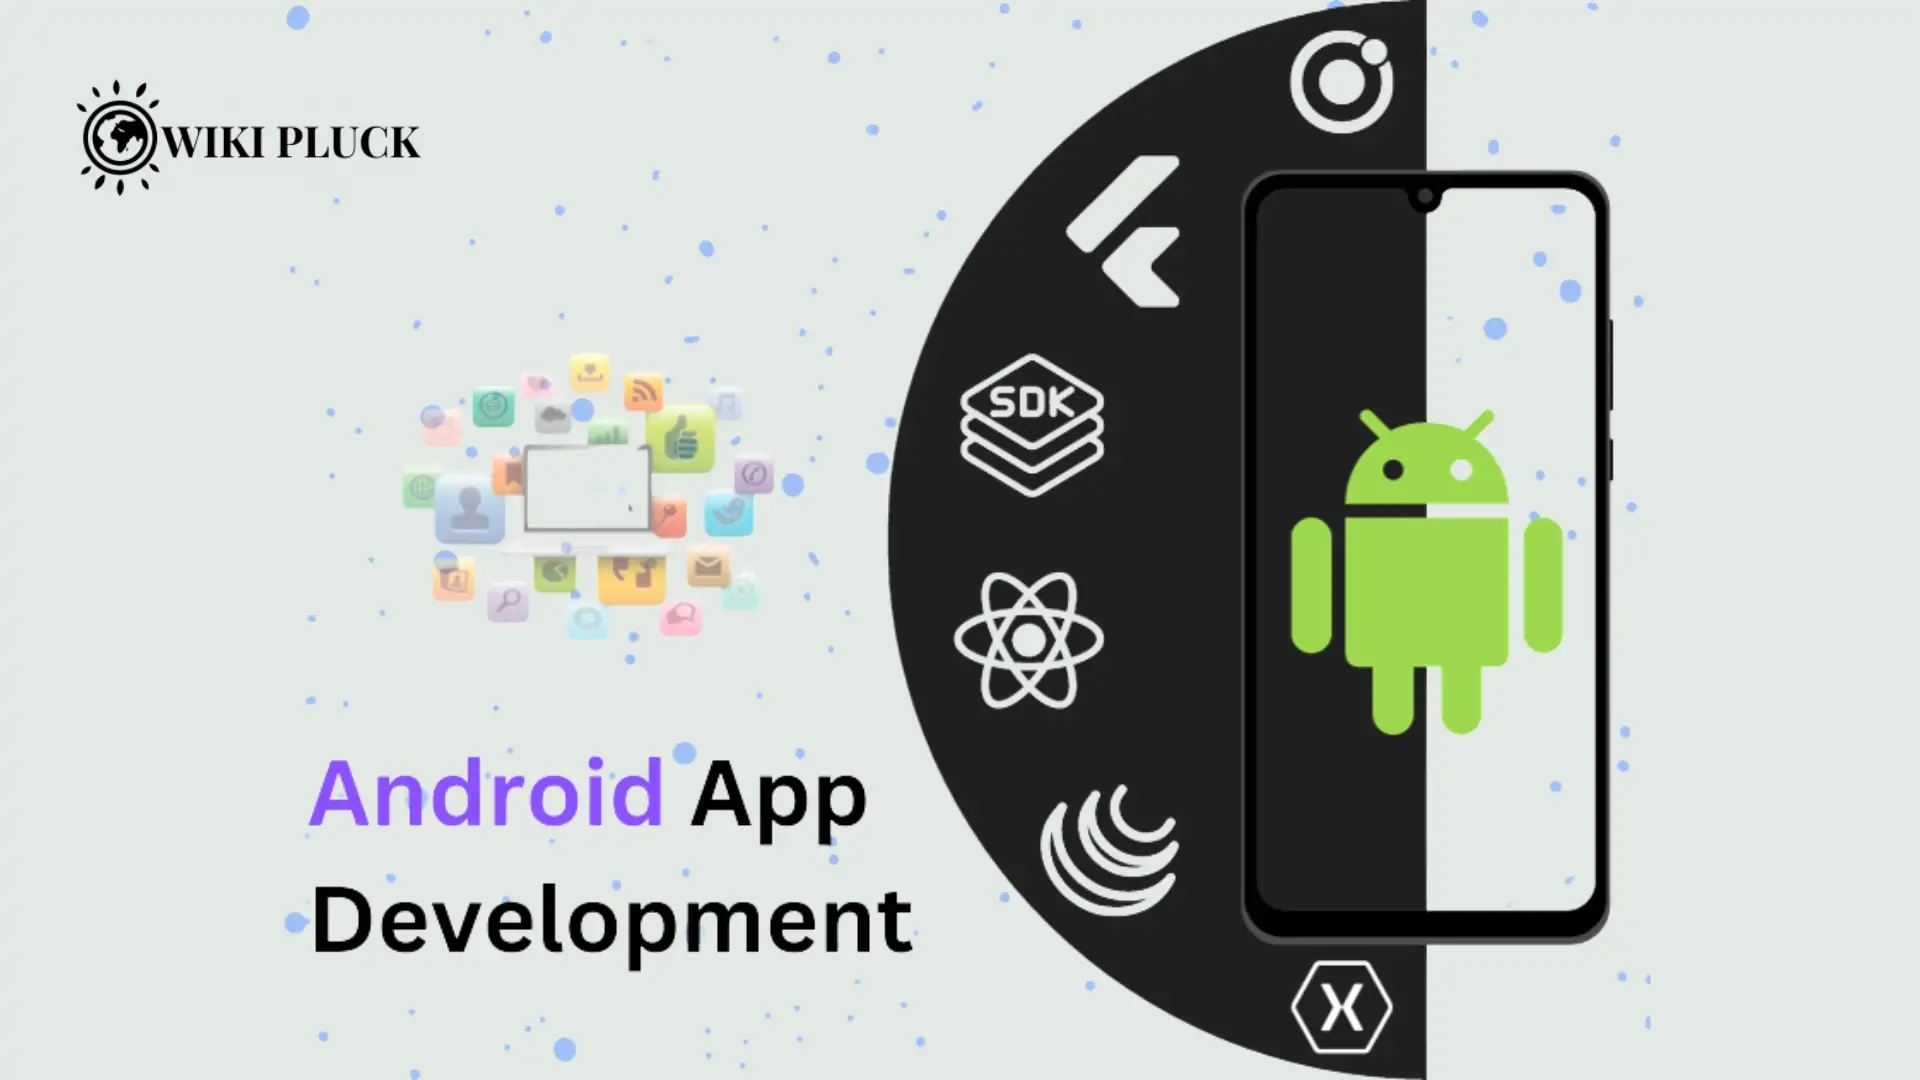 Guide to Android App Development